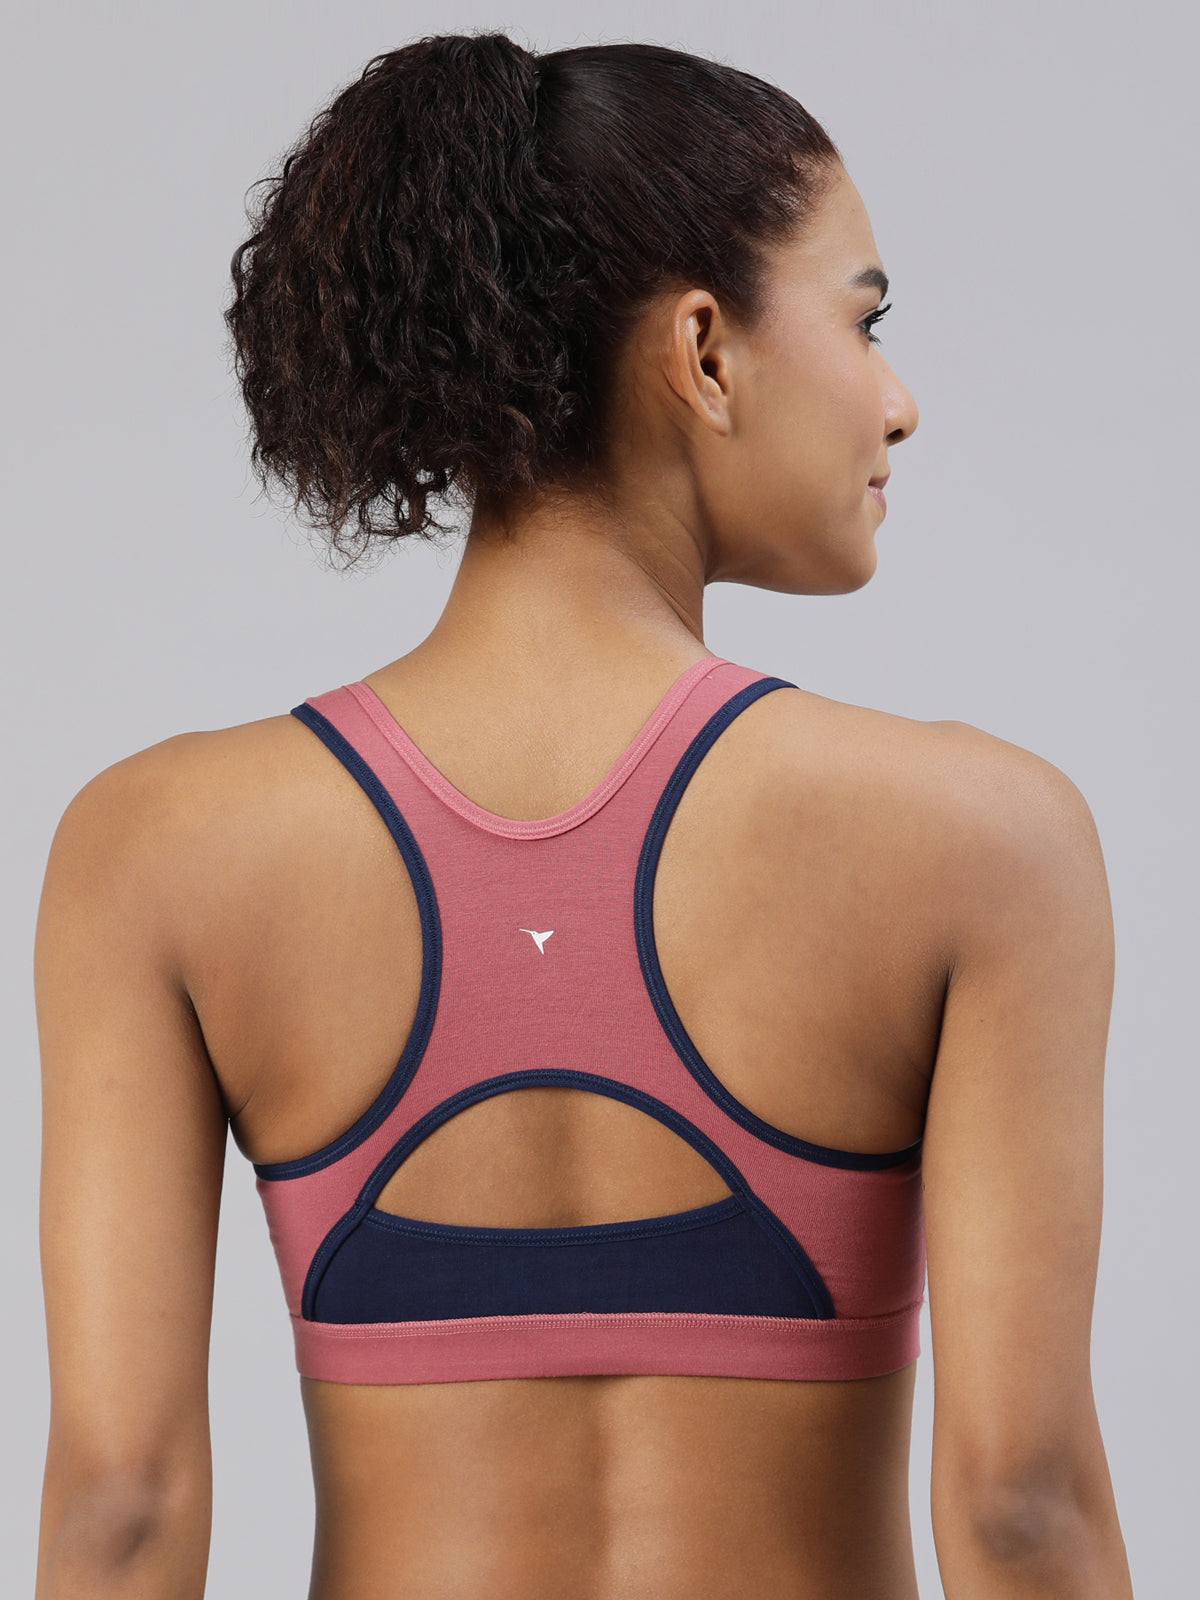 blossom-workout bra-rose gold3-Sports collection-utility based bra